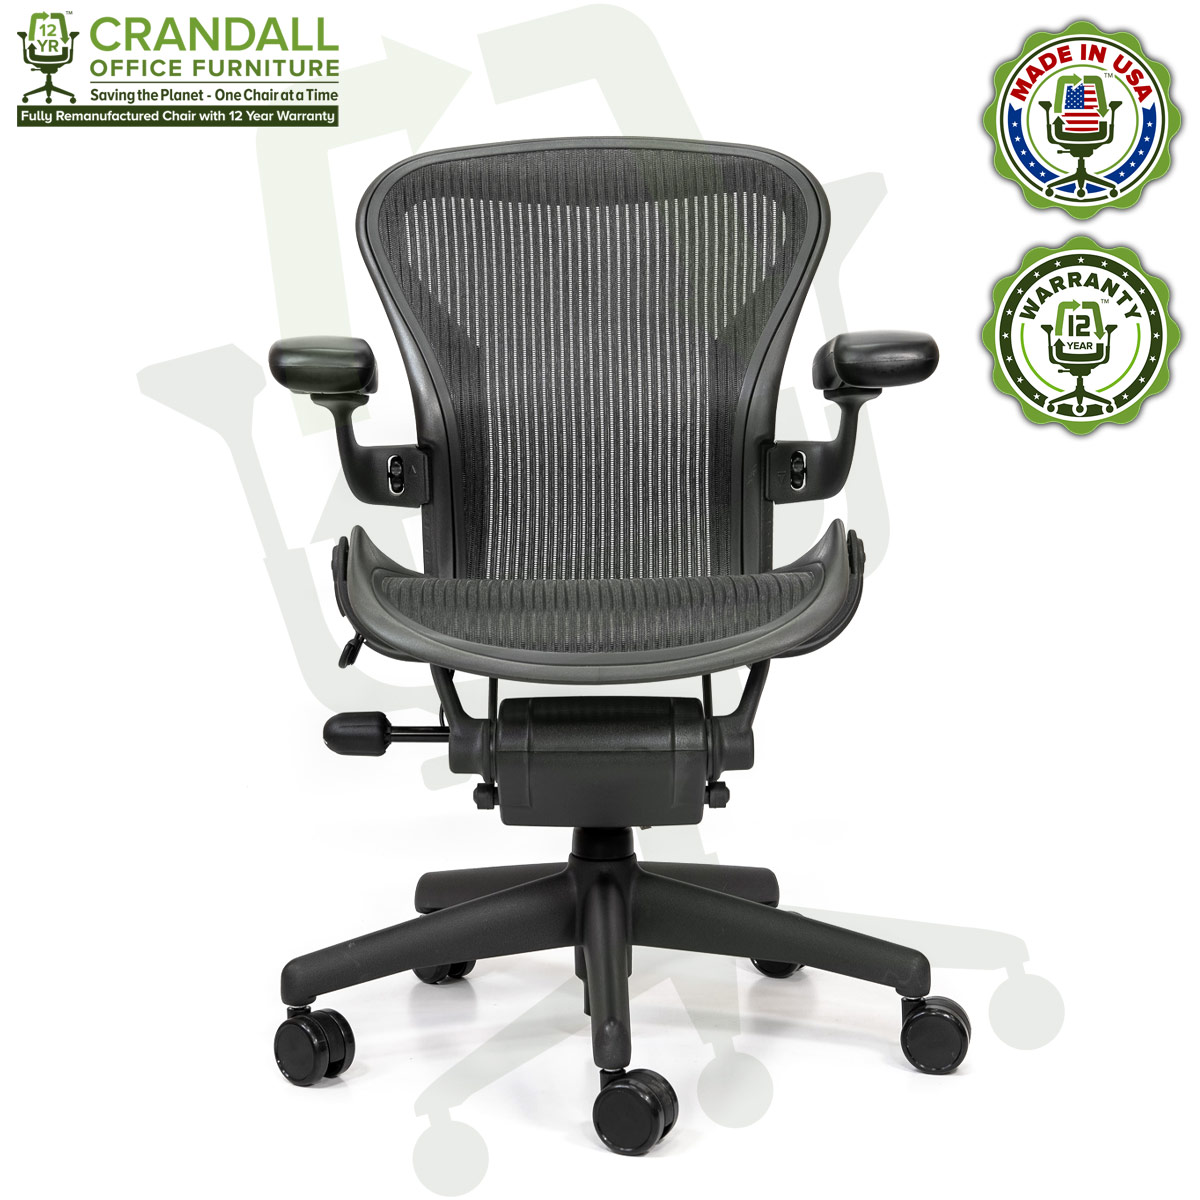 Refurbished Herman Miller Aeron Size A Chairs - Fast US Shipping